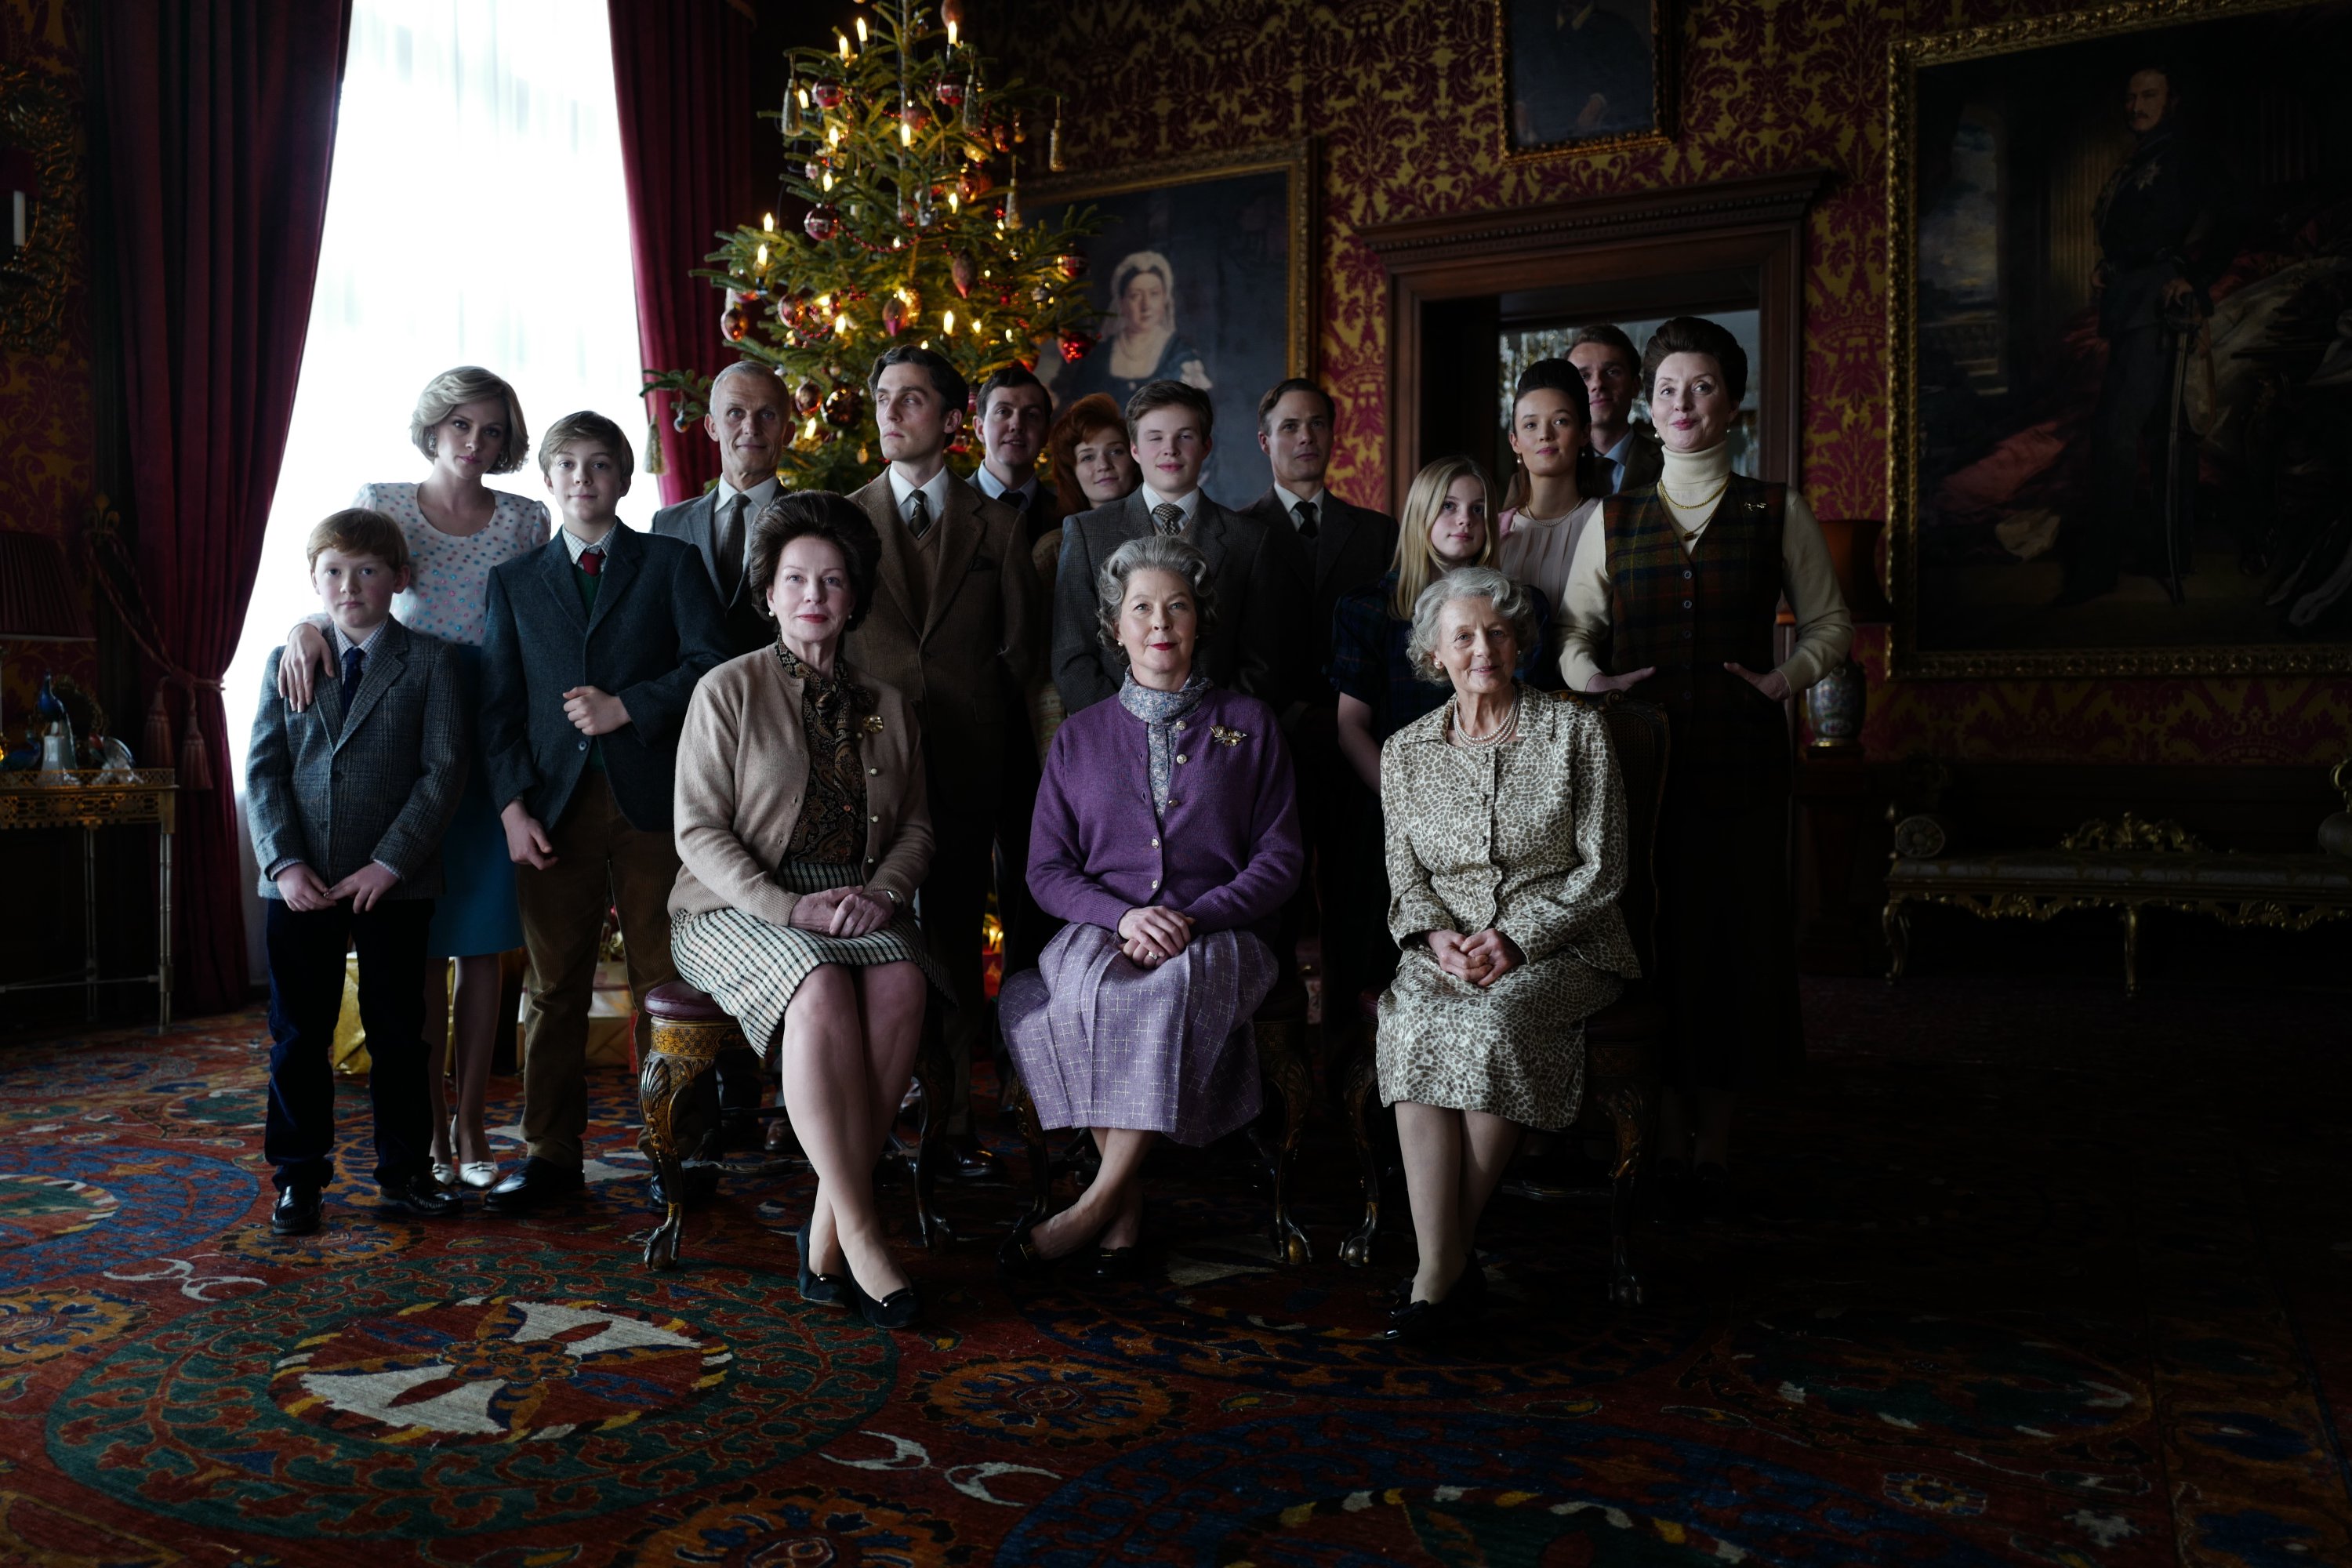 Freddy Spy (L) as Harry, Kristin Stewart (2L) as Diana, Jack Nielen (3L) as William, Jack Farthing (6L) as Charles and Stella Gonet (front M) as the Queen and fellow members of the Royal Family in a scene from the movie 